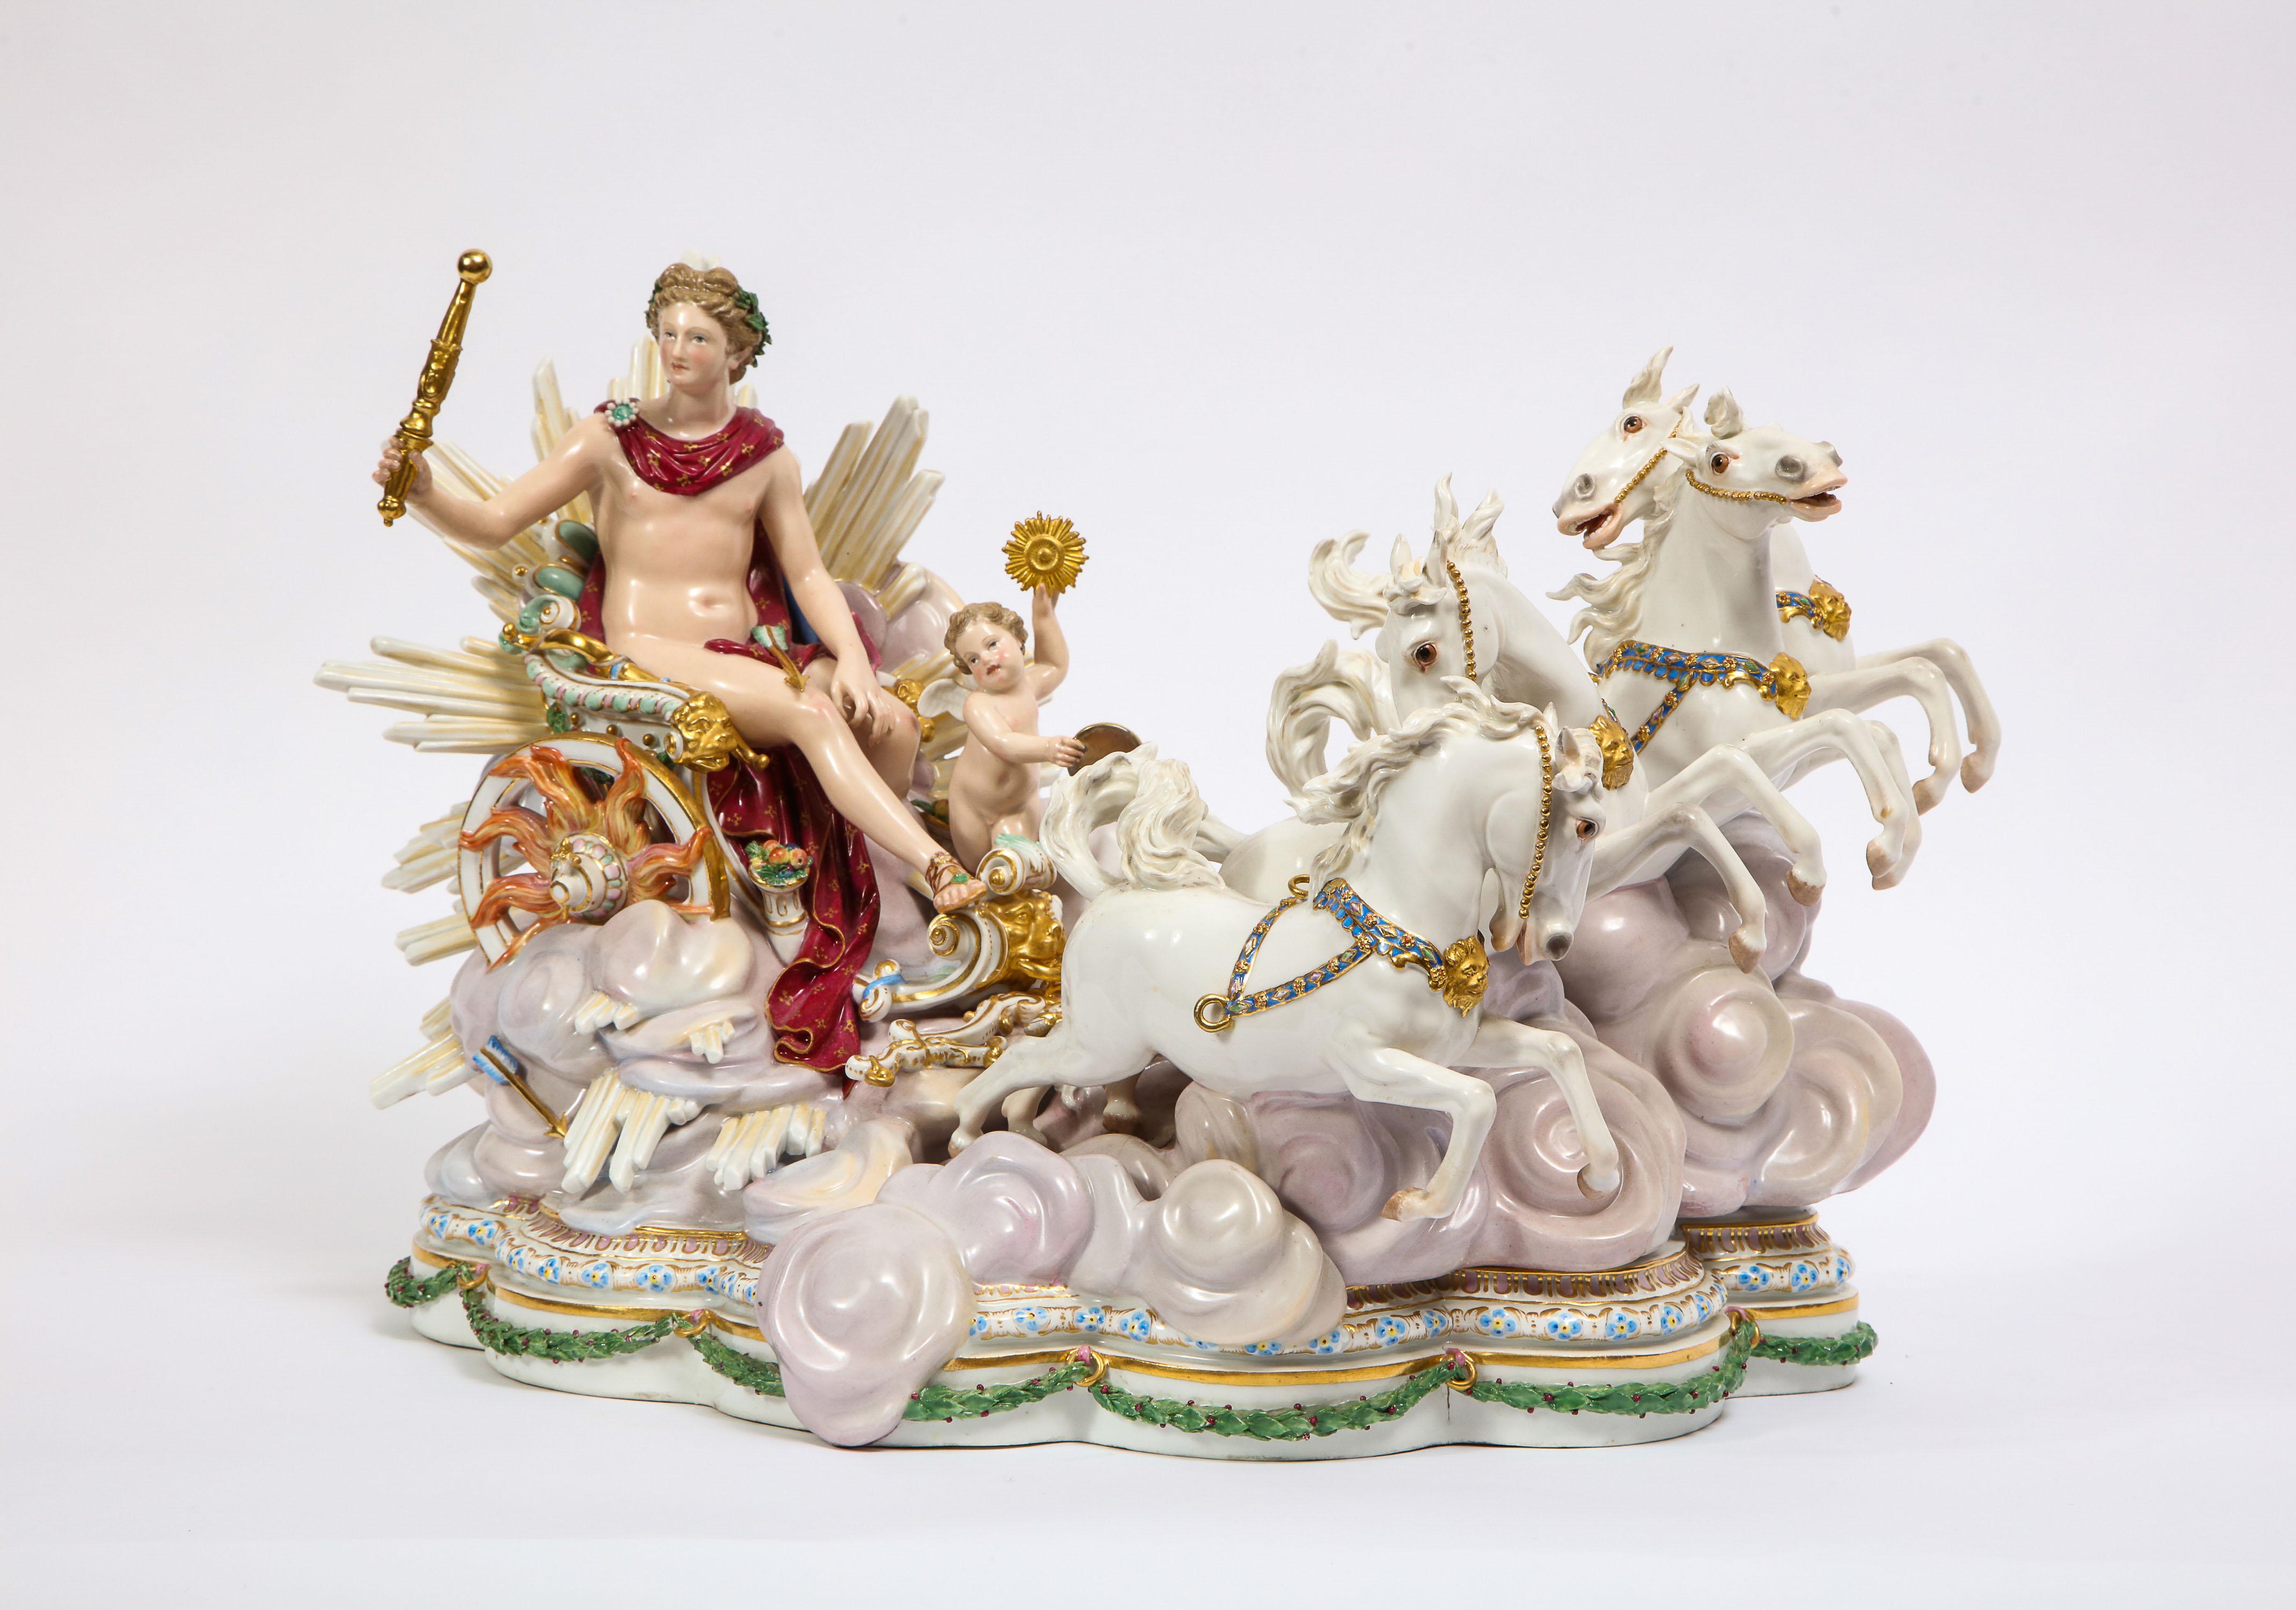 A magnificent and quite large, Baroque style, Museum quality, antique Meissen Porcelain grouping of Apollo, the Sun God's, Sun Chariot with his Putti Servant, originally designed by Johann Joachim Kändler in 1772-1773 for Czarina Katharina, Better